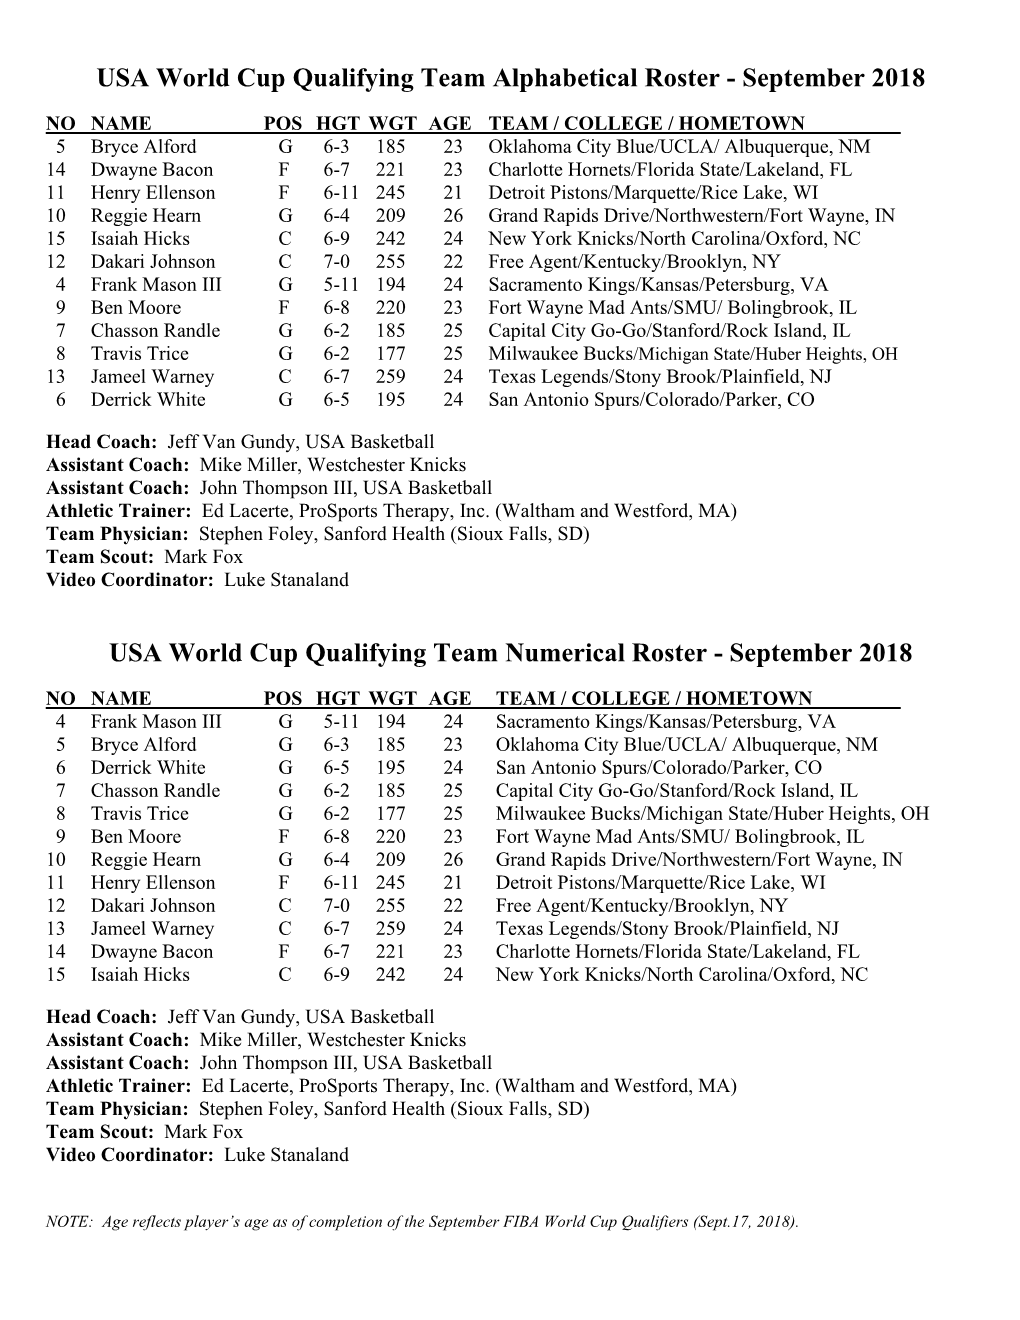 USA World Cup Qualifying Team Alphabetical Roster - September 2018